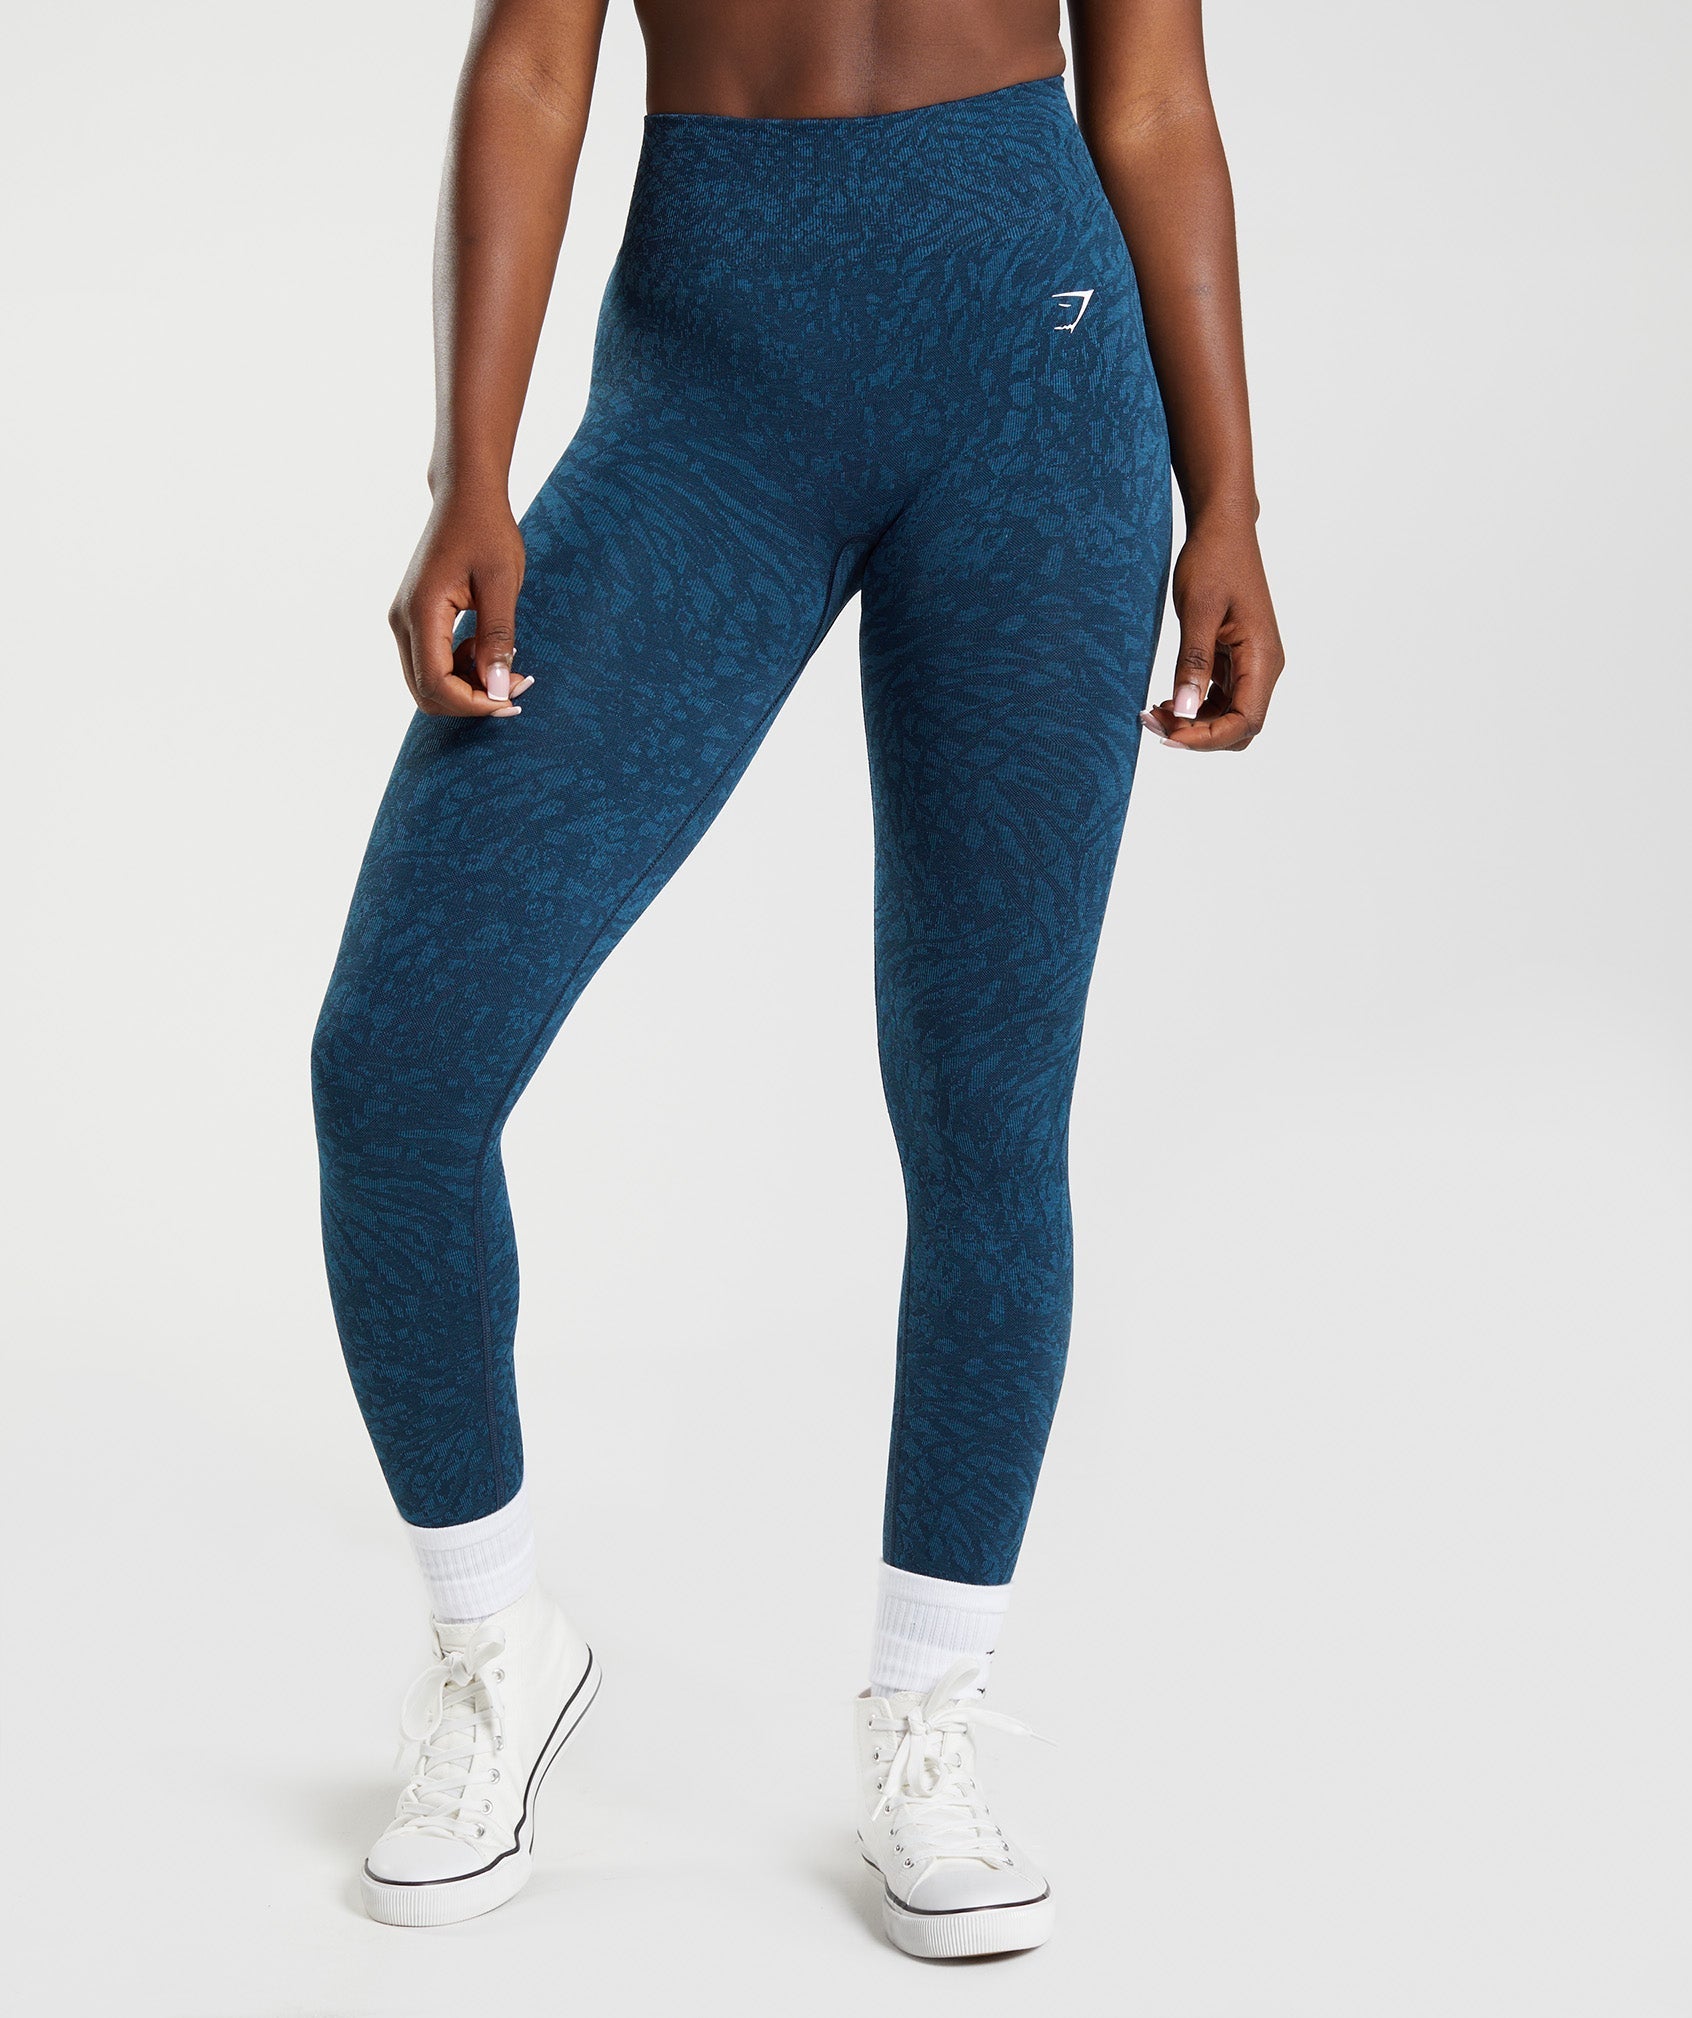 Tag Leggings with pockets — Wild Haggis Protein